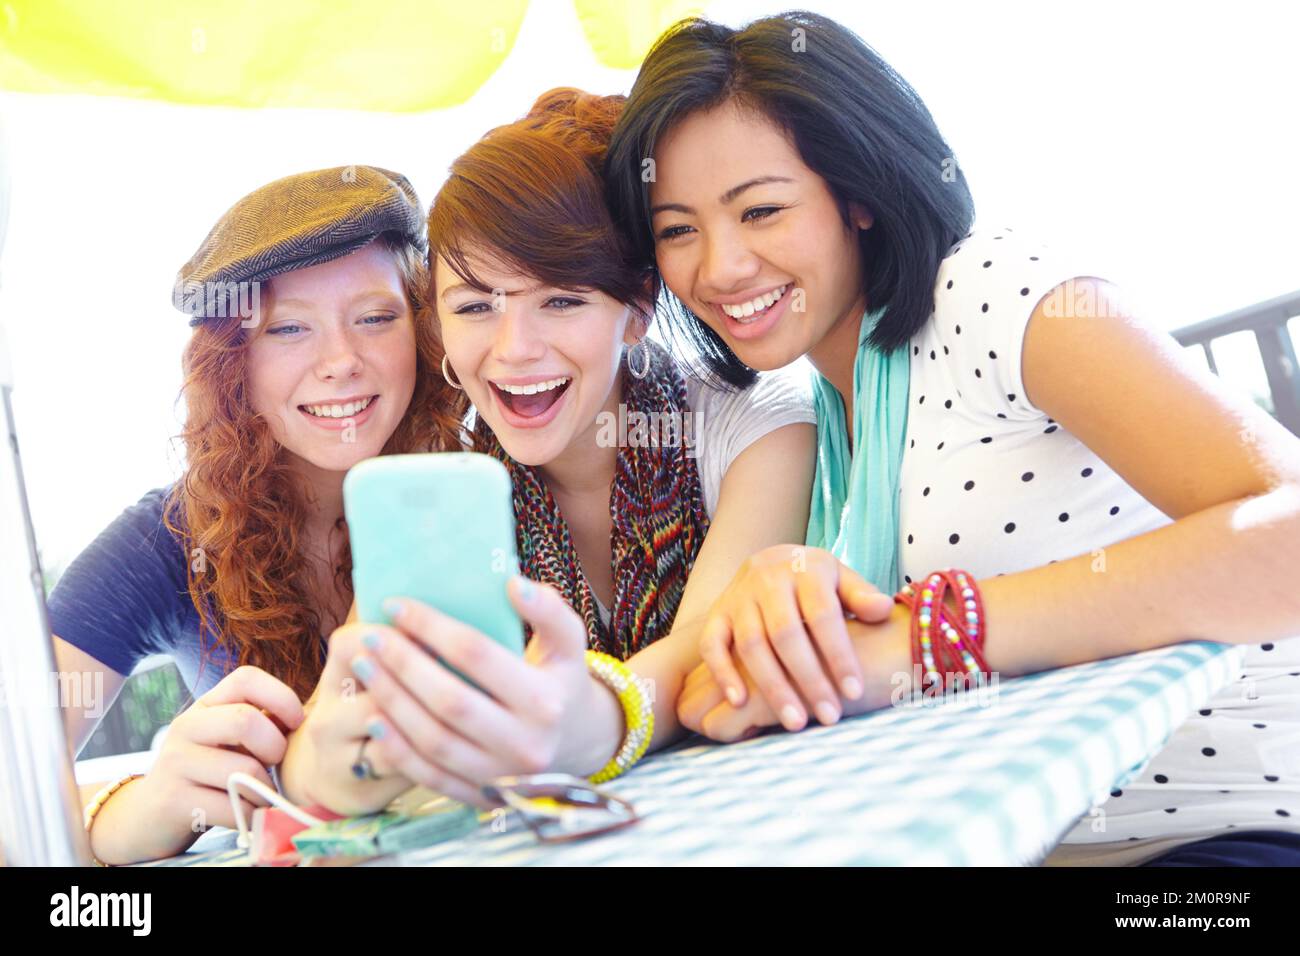 What a great photo. A group of adolescent girls laughing as they look at something on a smartphone screen. Stock Photo